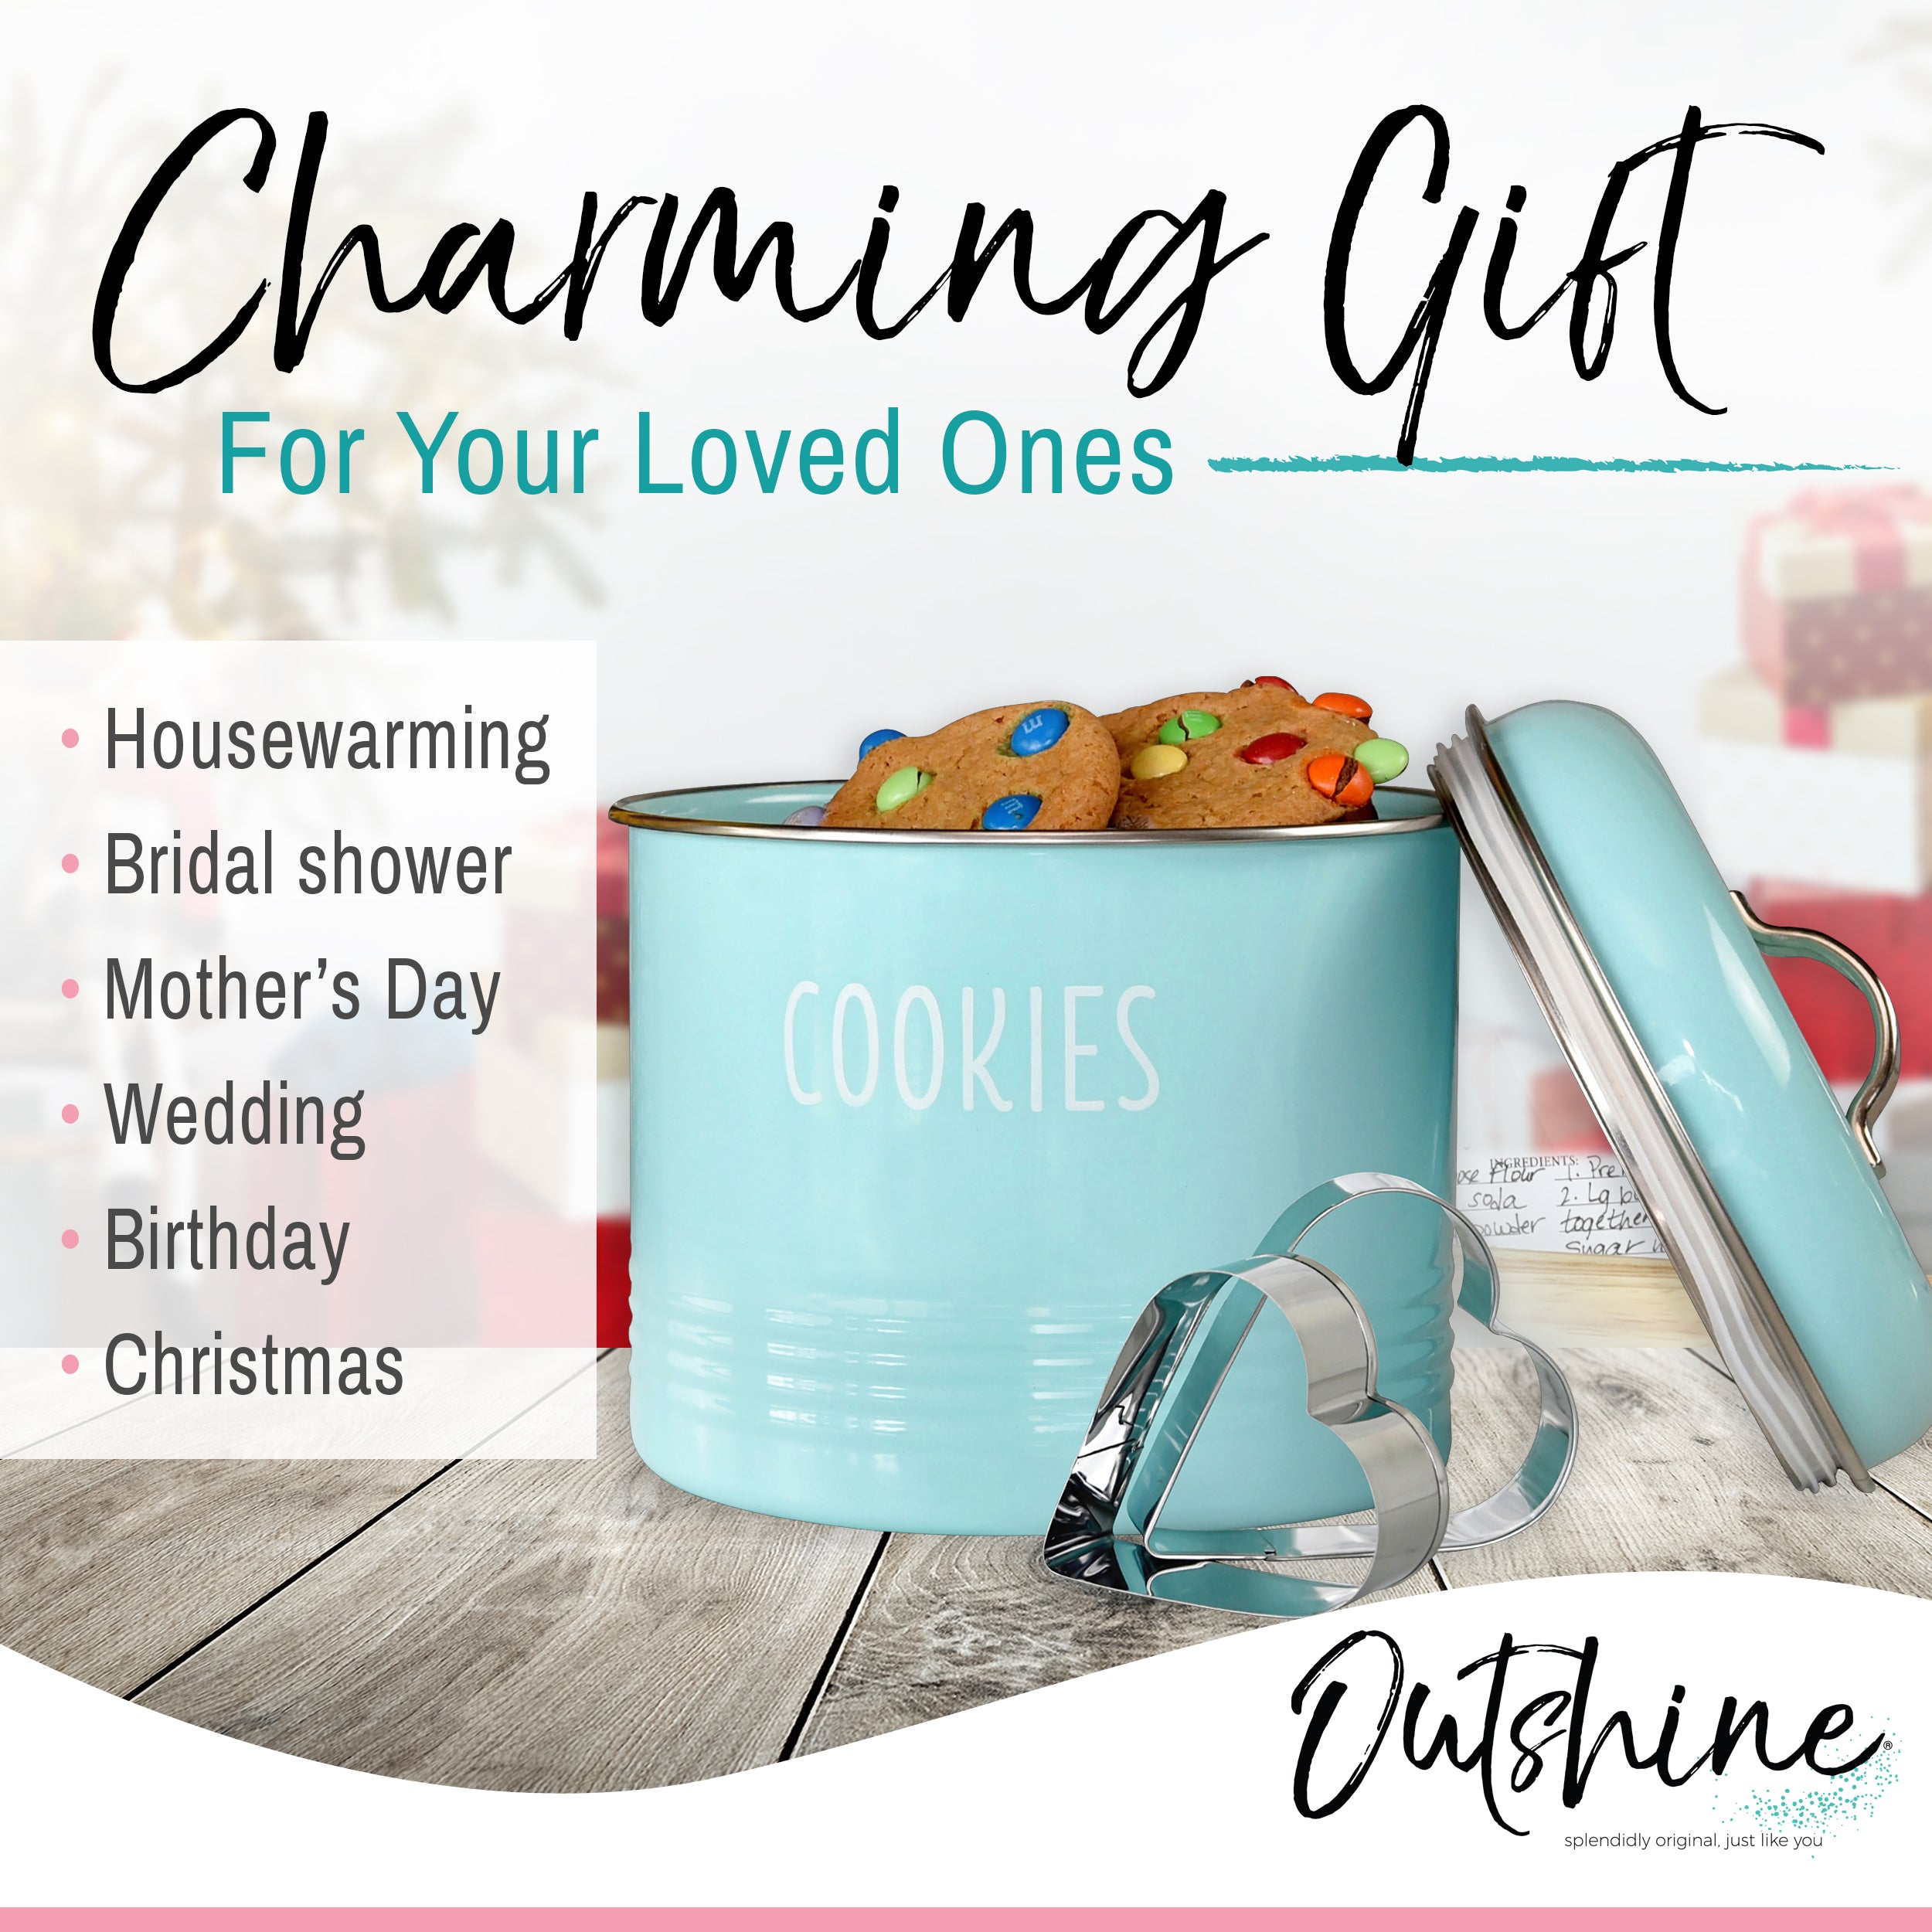 Outshine Mint Cookie Jar with Airtight Lids